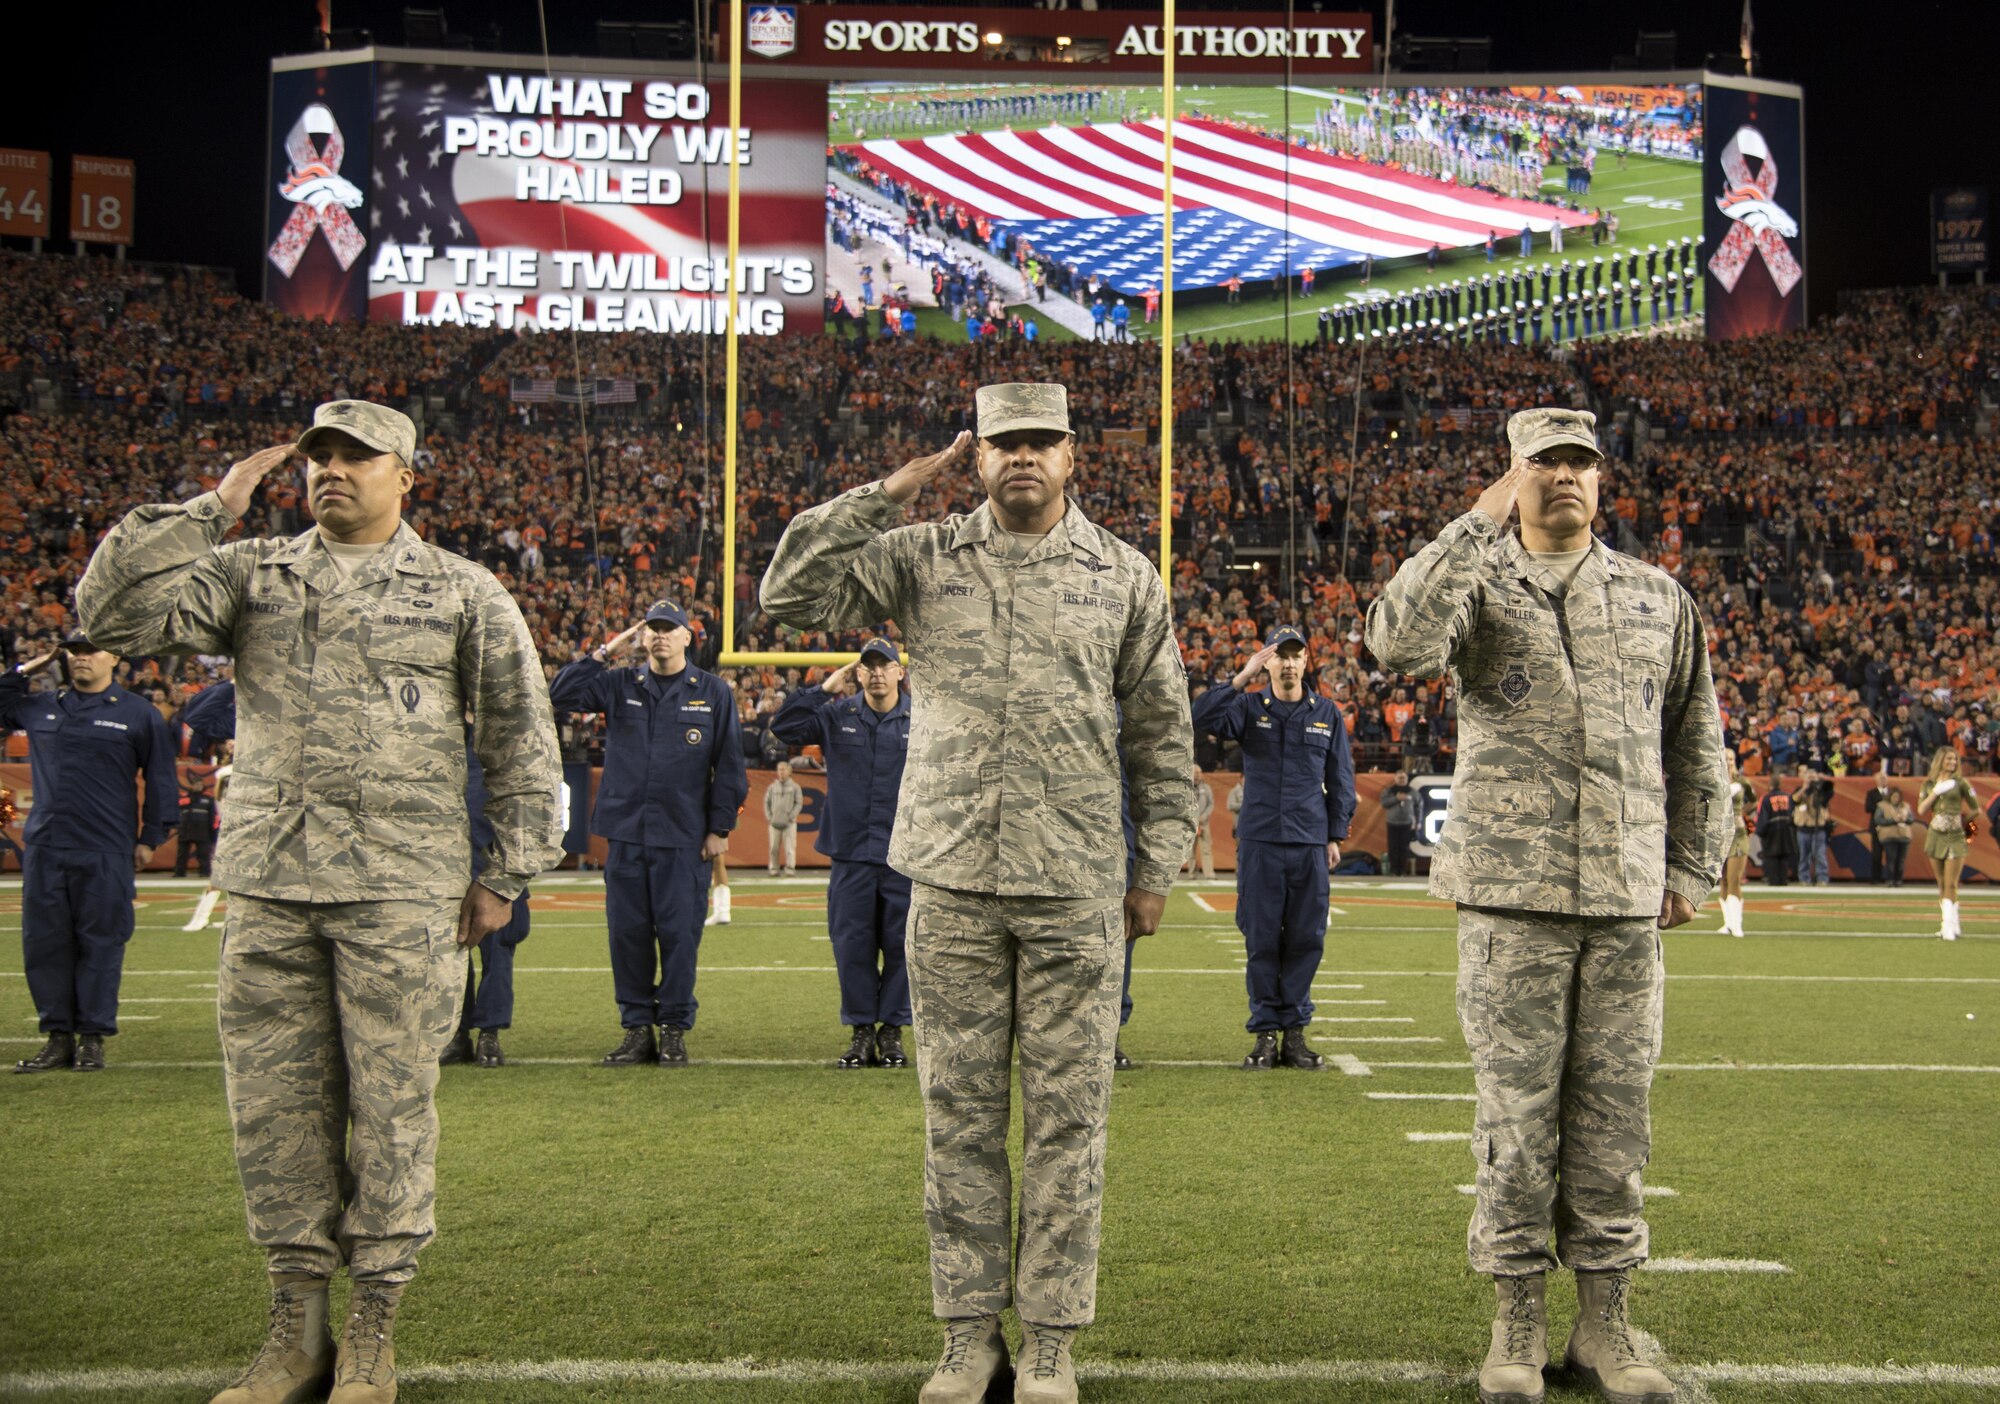 From left to right: Col. Lorenzo “Che” Bradley, 460th  Operations Group commander, Chief Master Sgt. Rod Lindsey, 460th Space Wing command chief, and Col. David Miller, Jr., 460th Space Wing commander, salute the American flag during the singing of the National Anthem Nov. 12, 2017, at Sports Authority Stadium at Mile High in Denver.